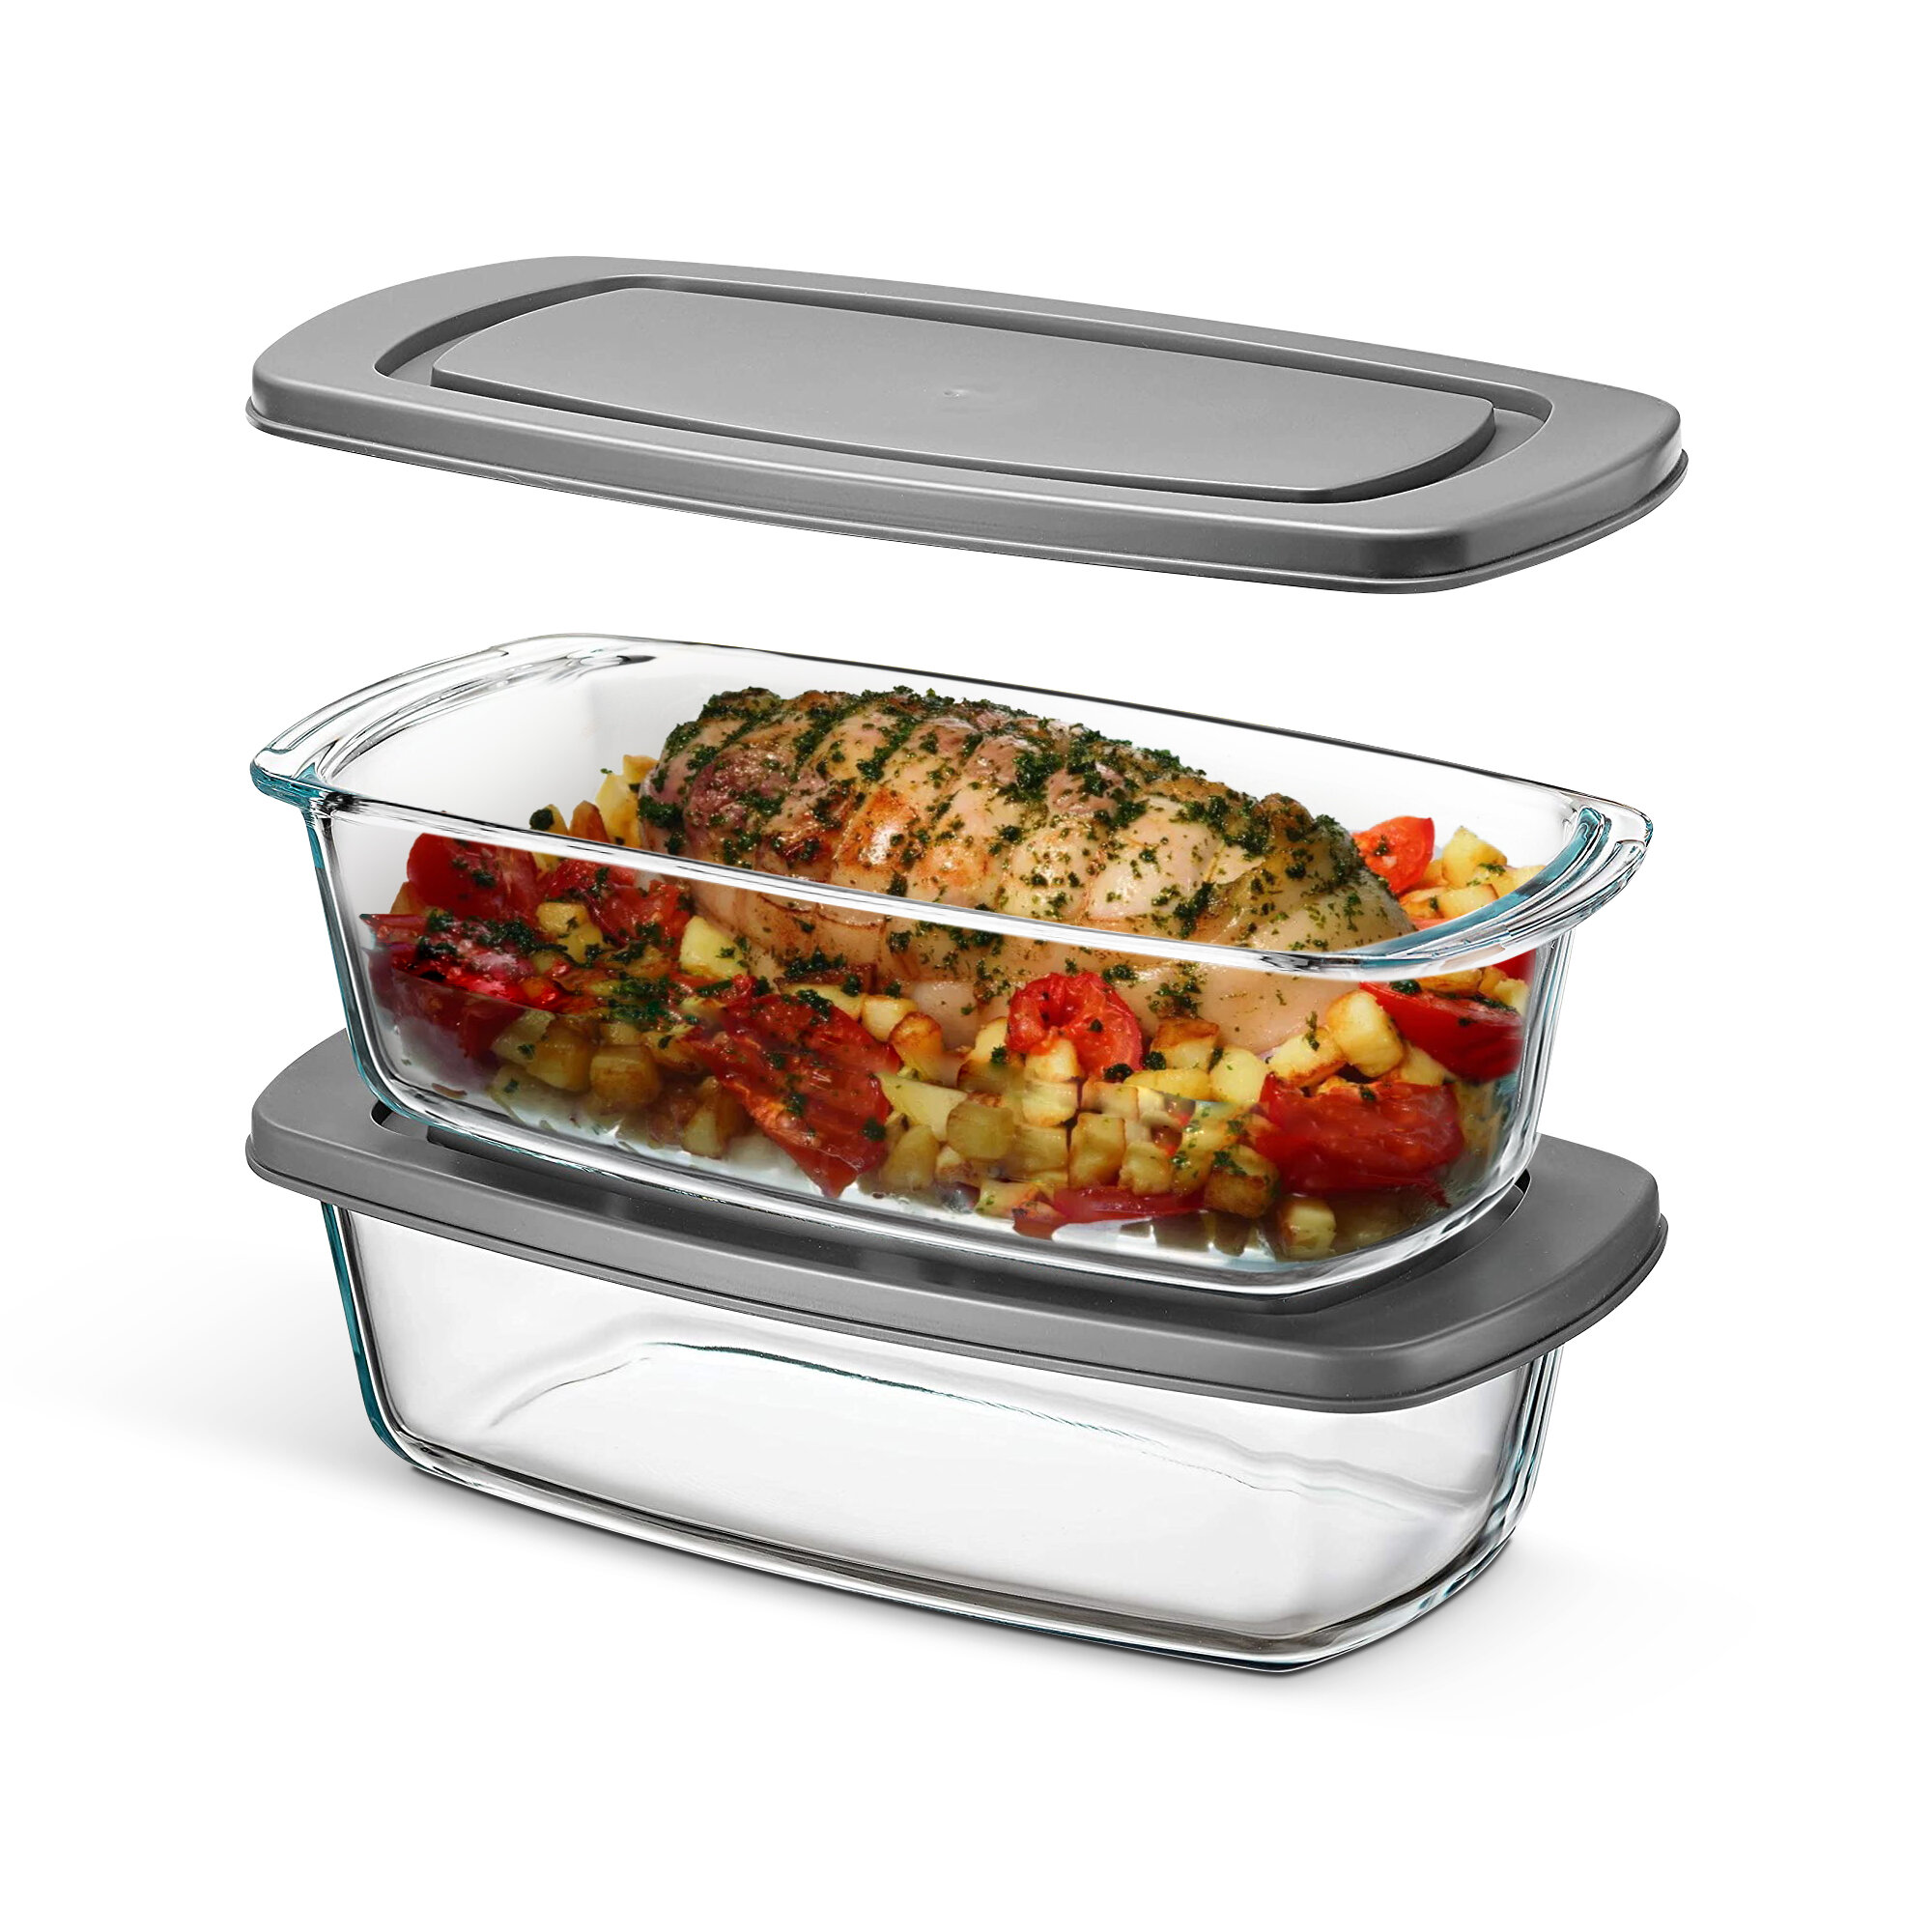 8-Piece Glass Bakeware Set with Lids, Rectangular Glass Baking Dish with  BPA-Free Lid, Glass Pans for Baking, Freezer and Oven Safe